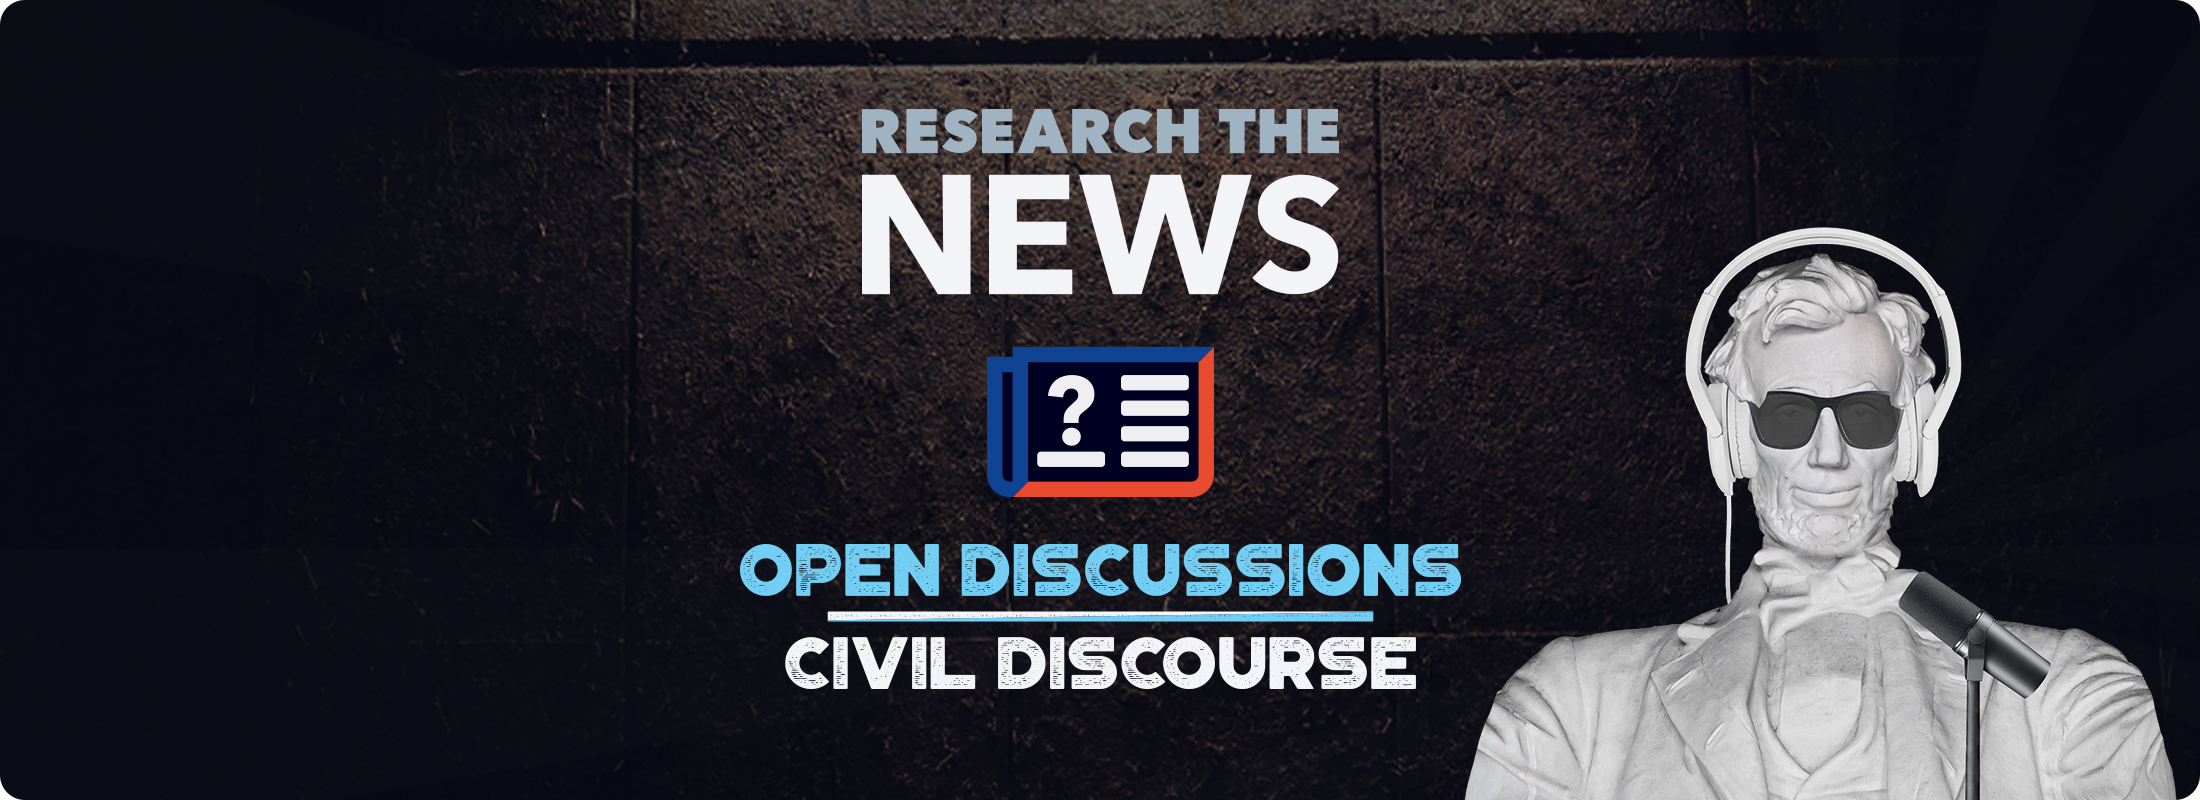 Research the News Launches